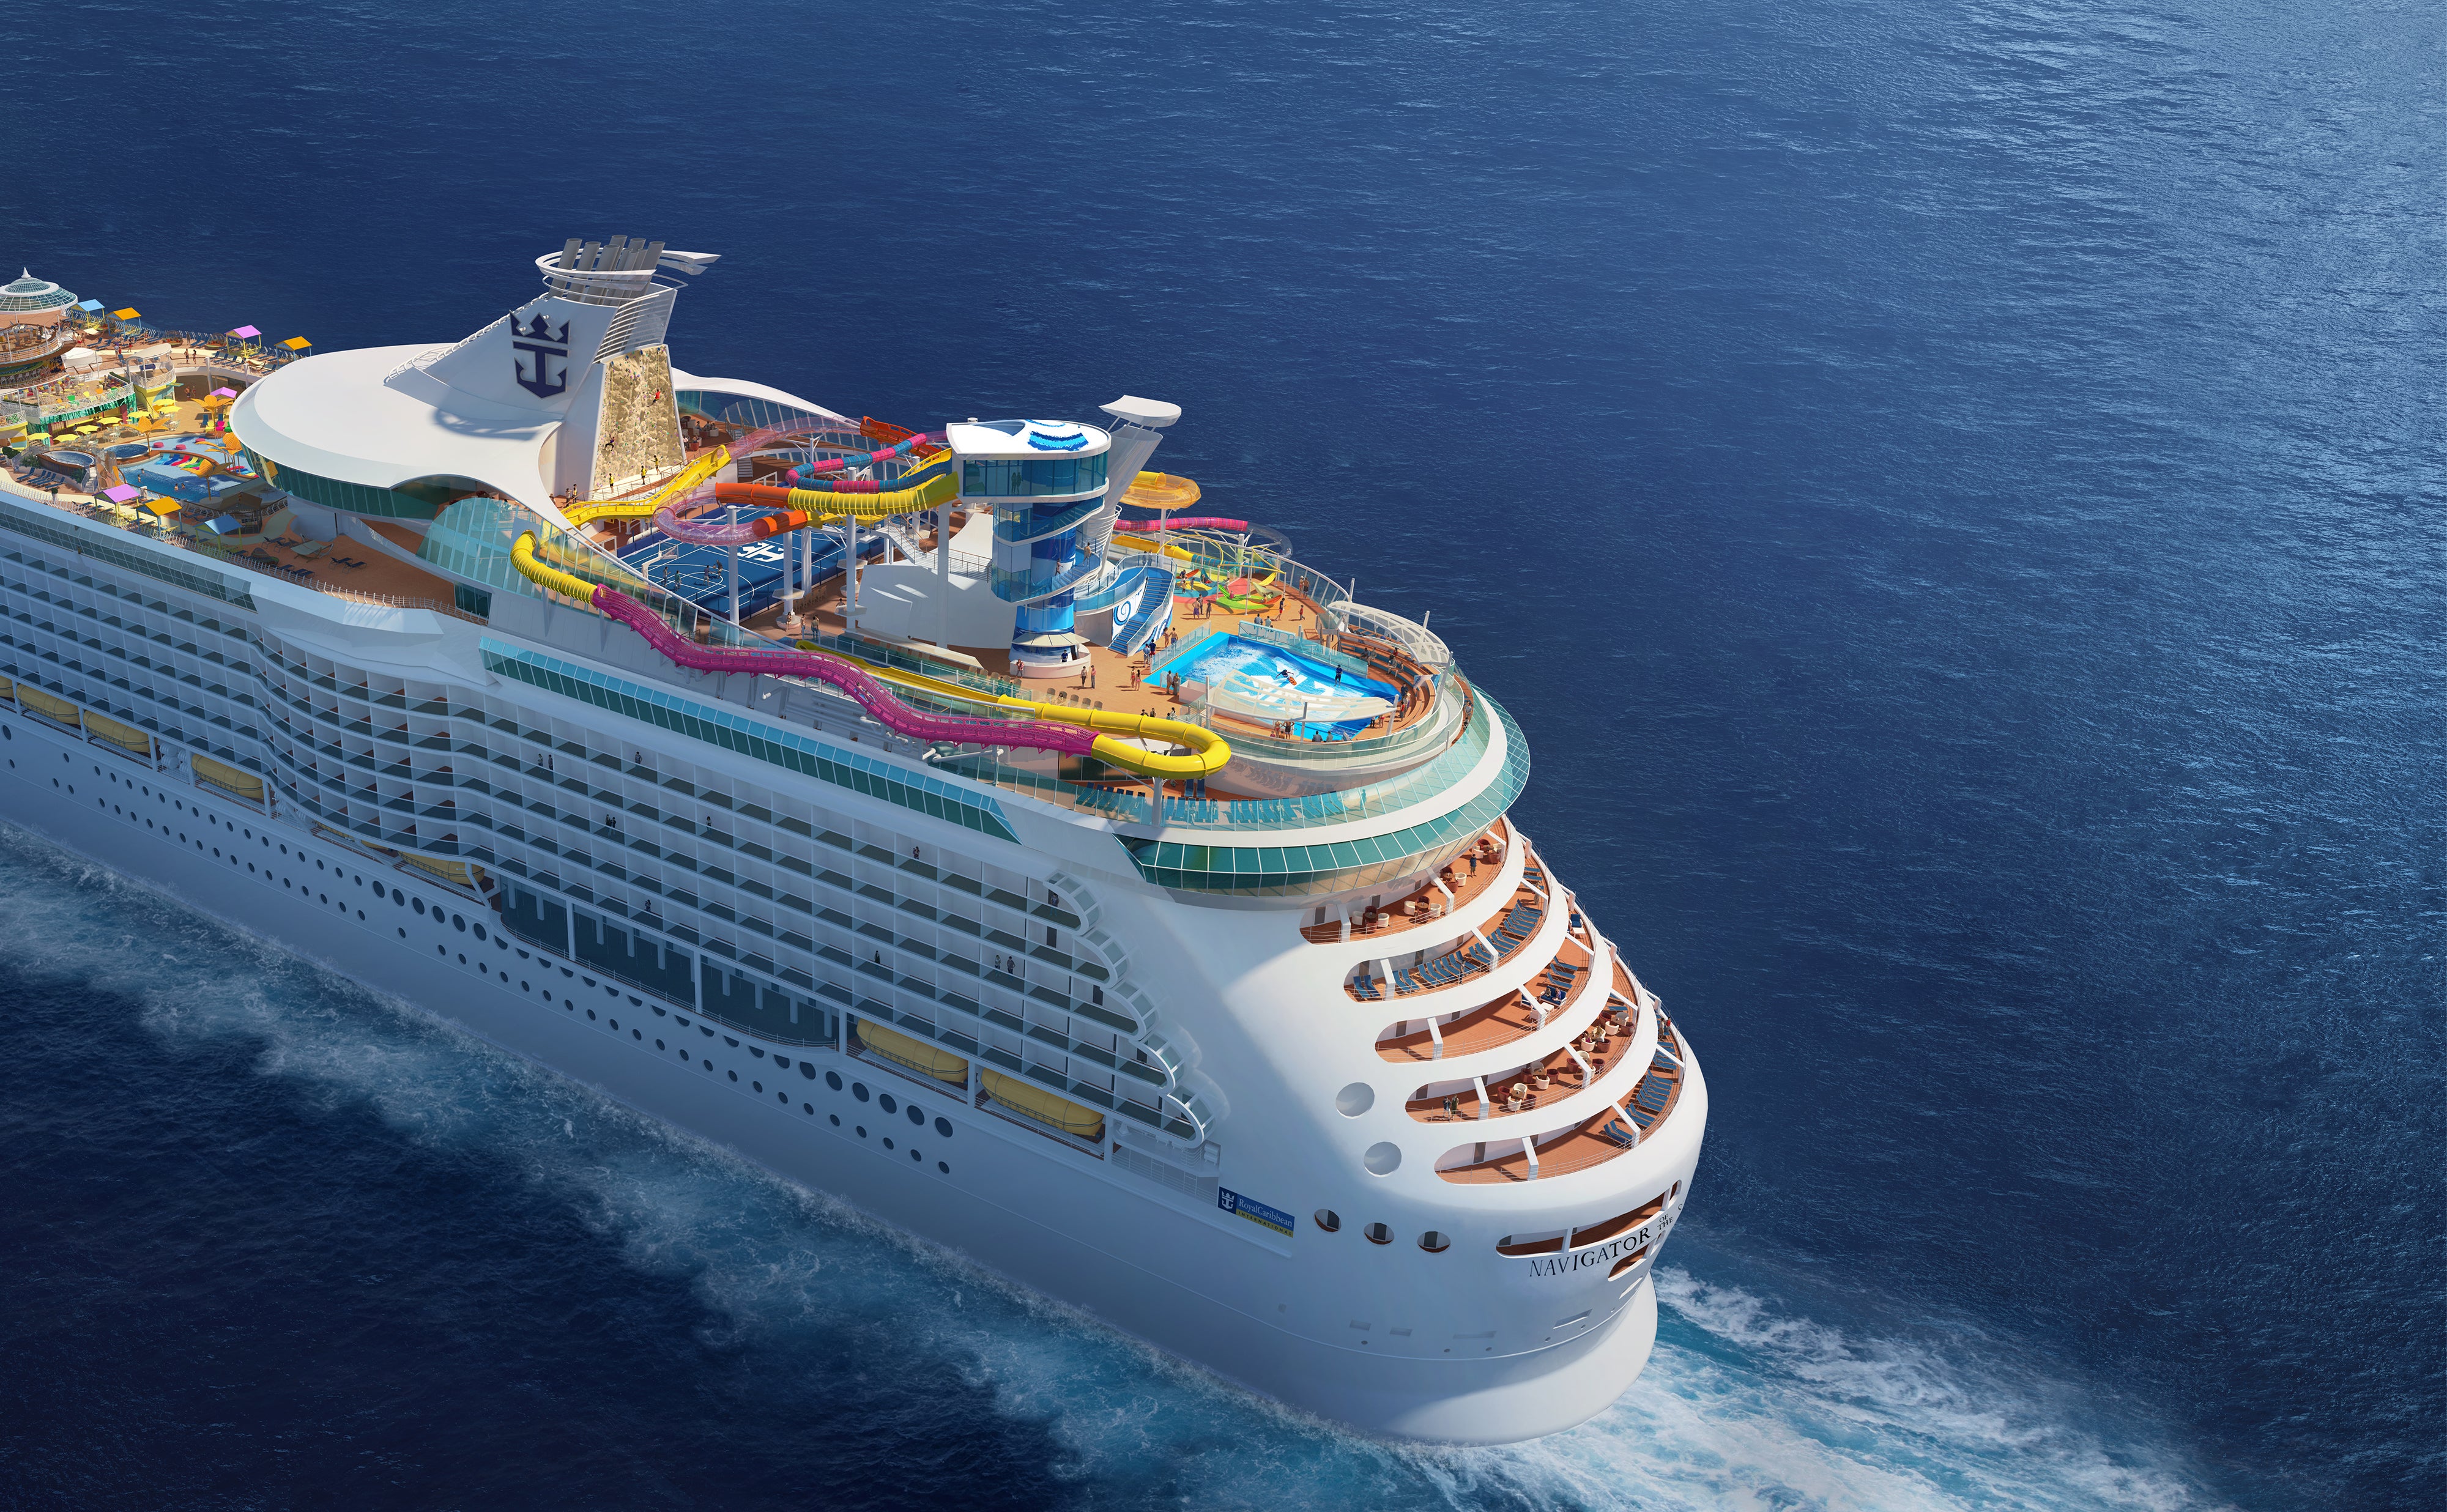 Royal Caribbean is about to embark from a new domestic port on the West Coast for the first time in years